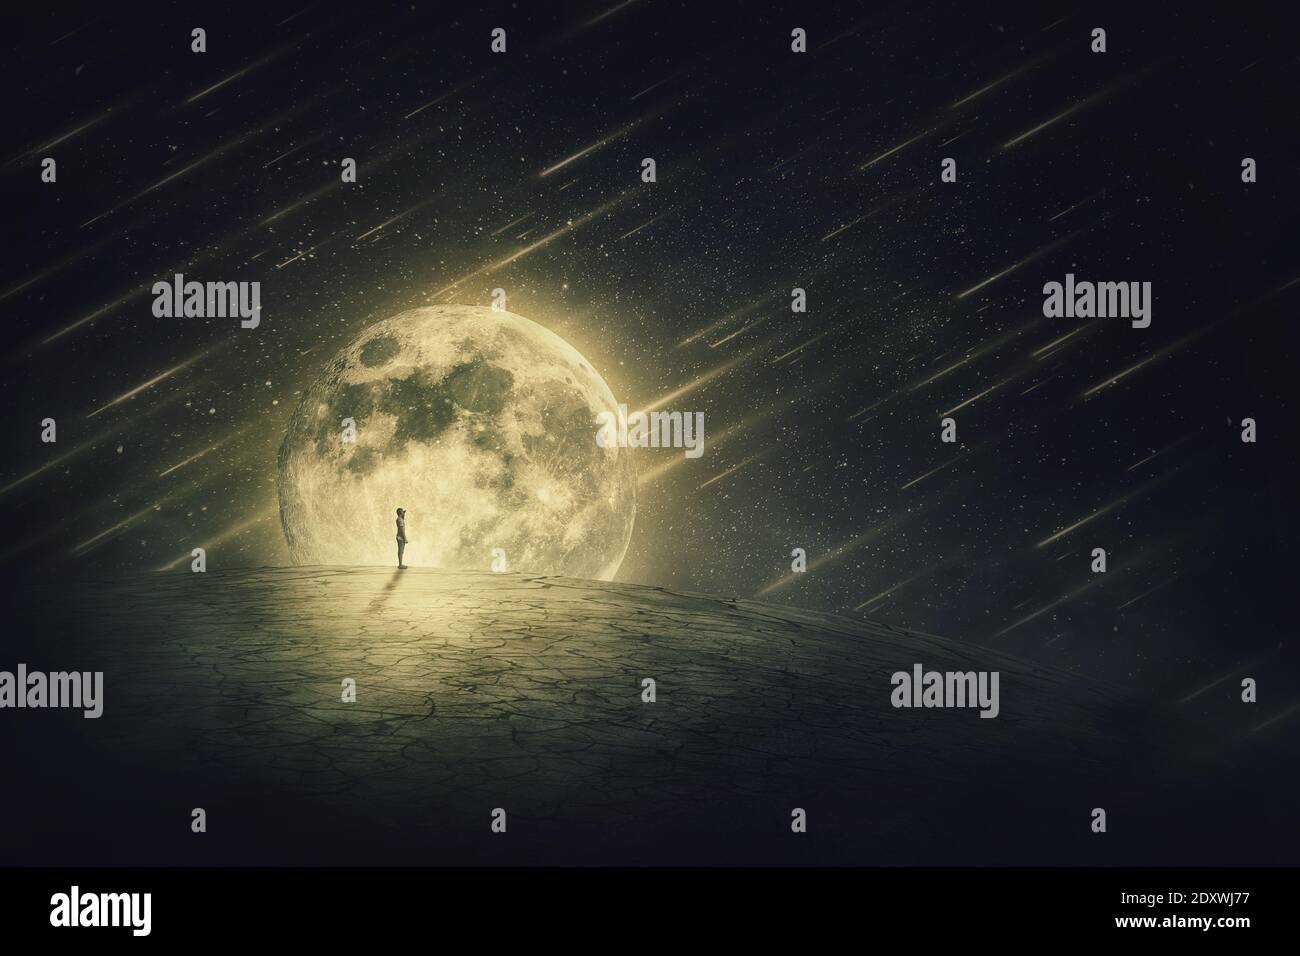 Surreal world scene with a person silhouette, alone on a dry empty land, looking at the starry night sky with comets falling, over a full moon backgro Stock Photo